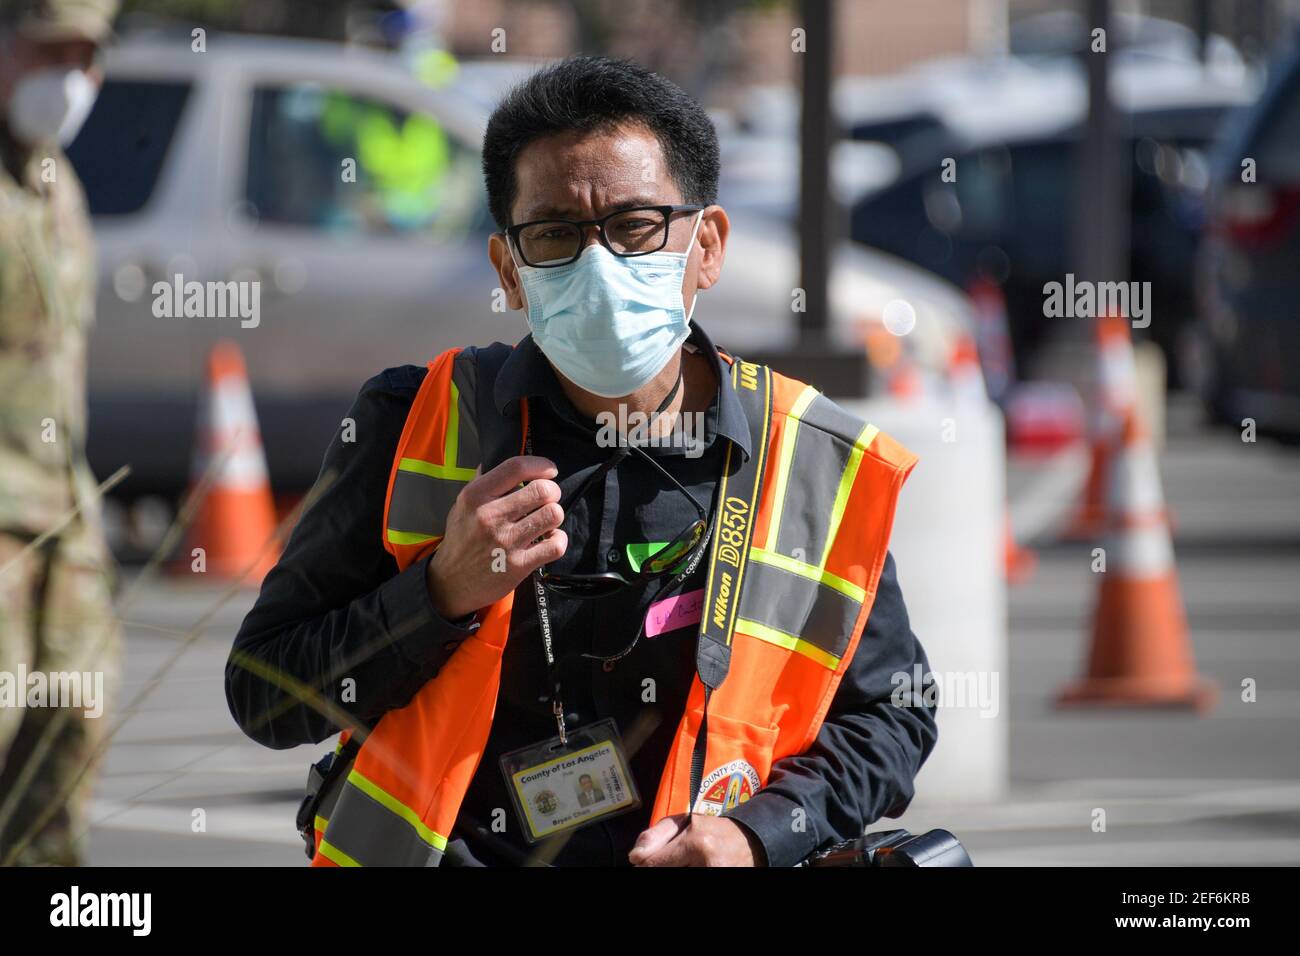 Chief photographer for LA County Board of Supervisors Bryan Chan during a press conference relating to the opening of a state and federal mass vaccina Stock Photo